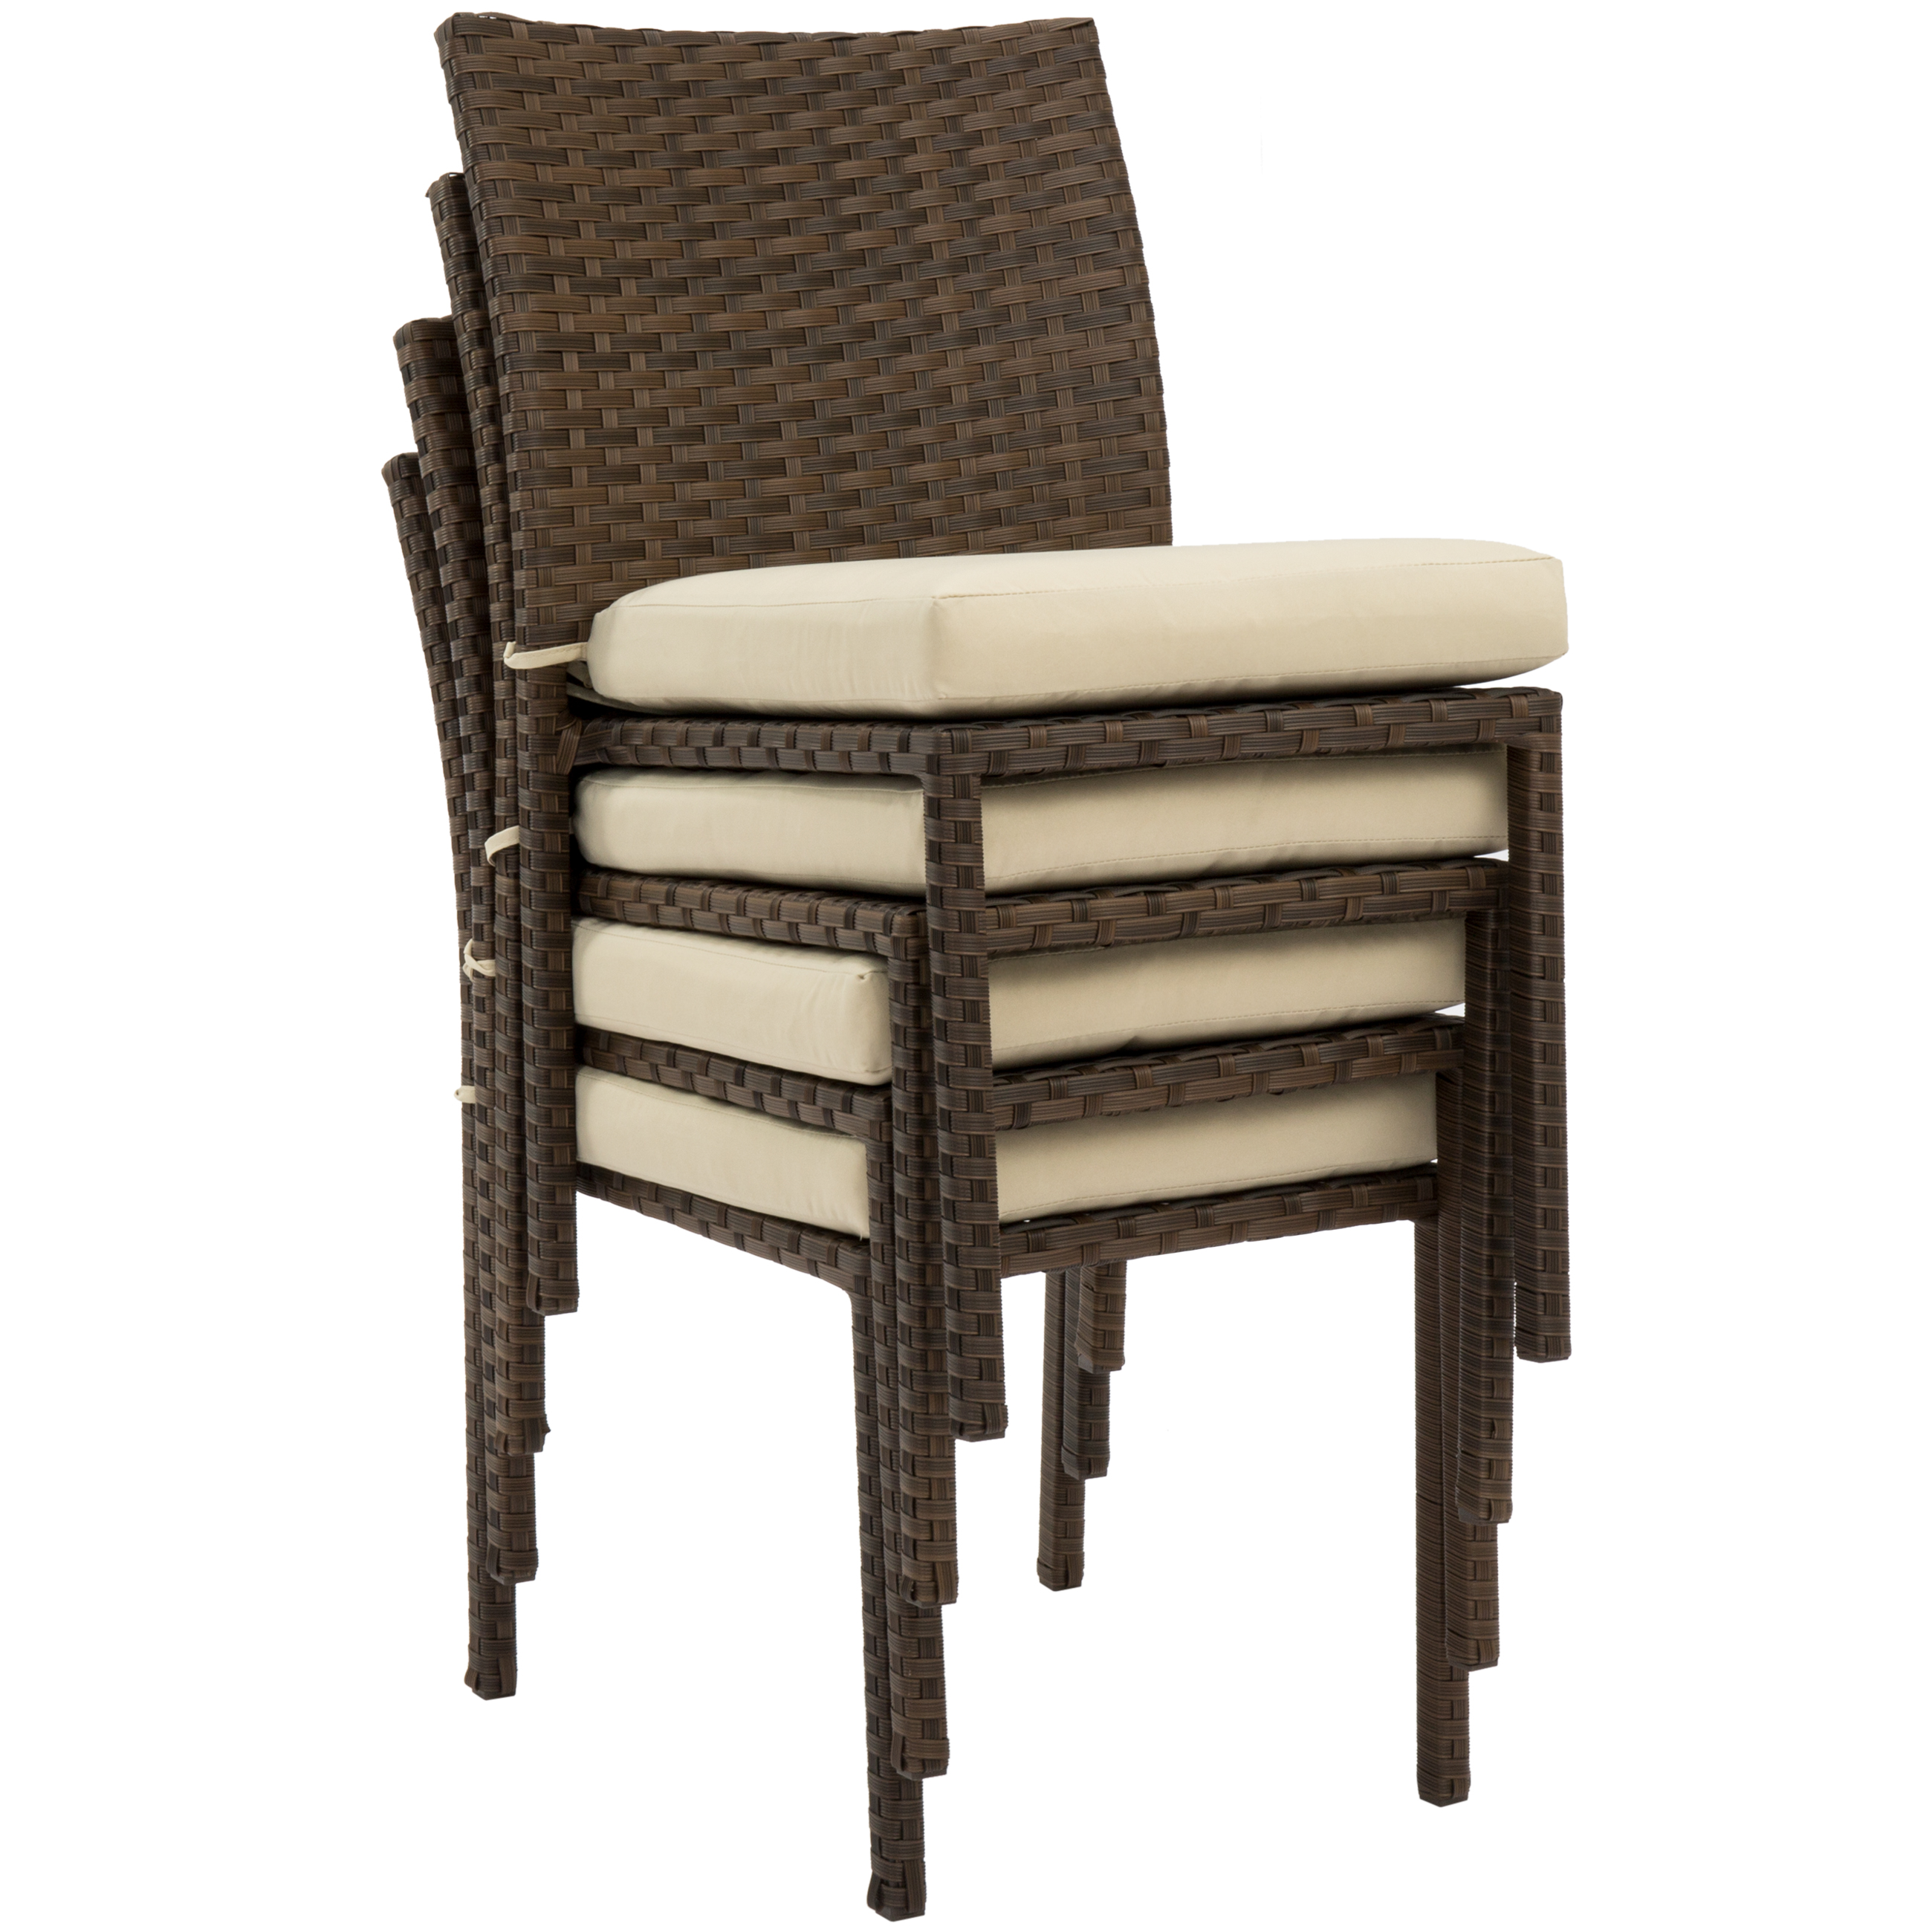 BCP Set of 4 Stackable Outdoor Patio Wicker Chairs w/ Cushions, UV